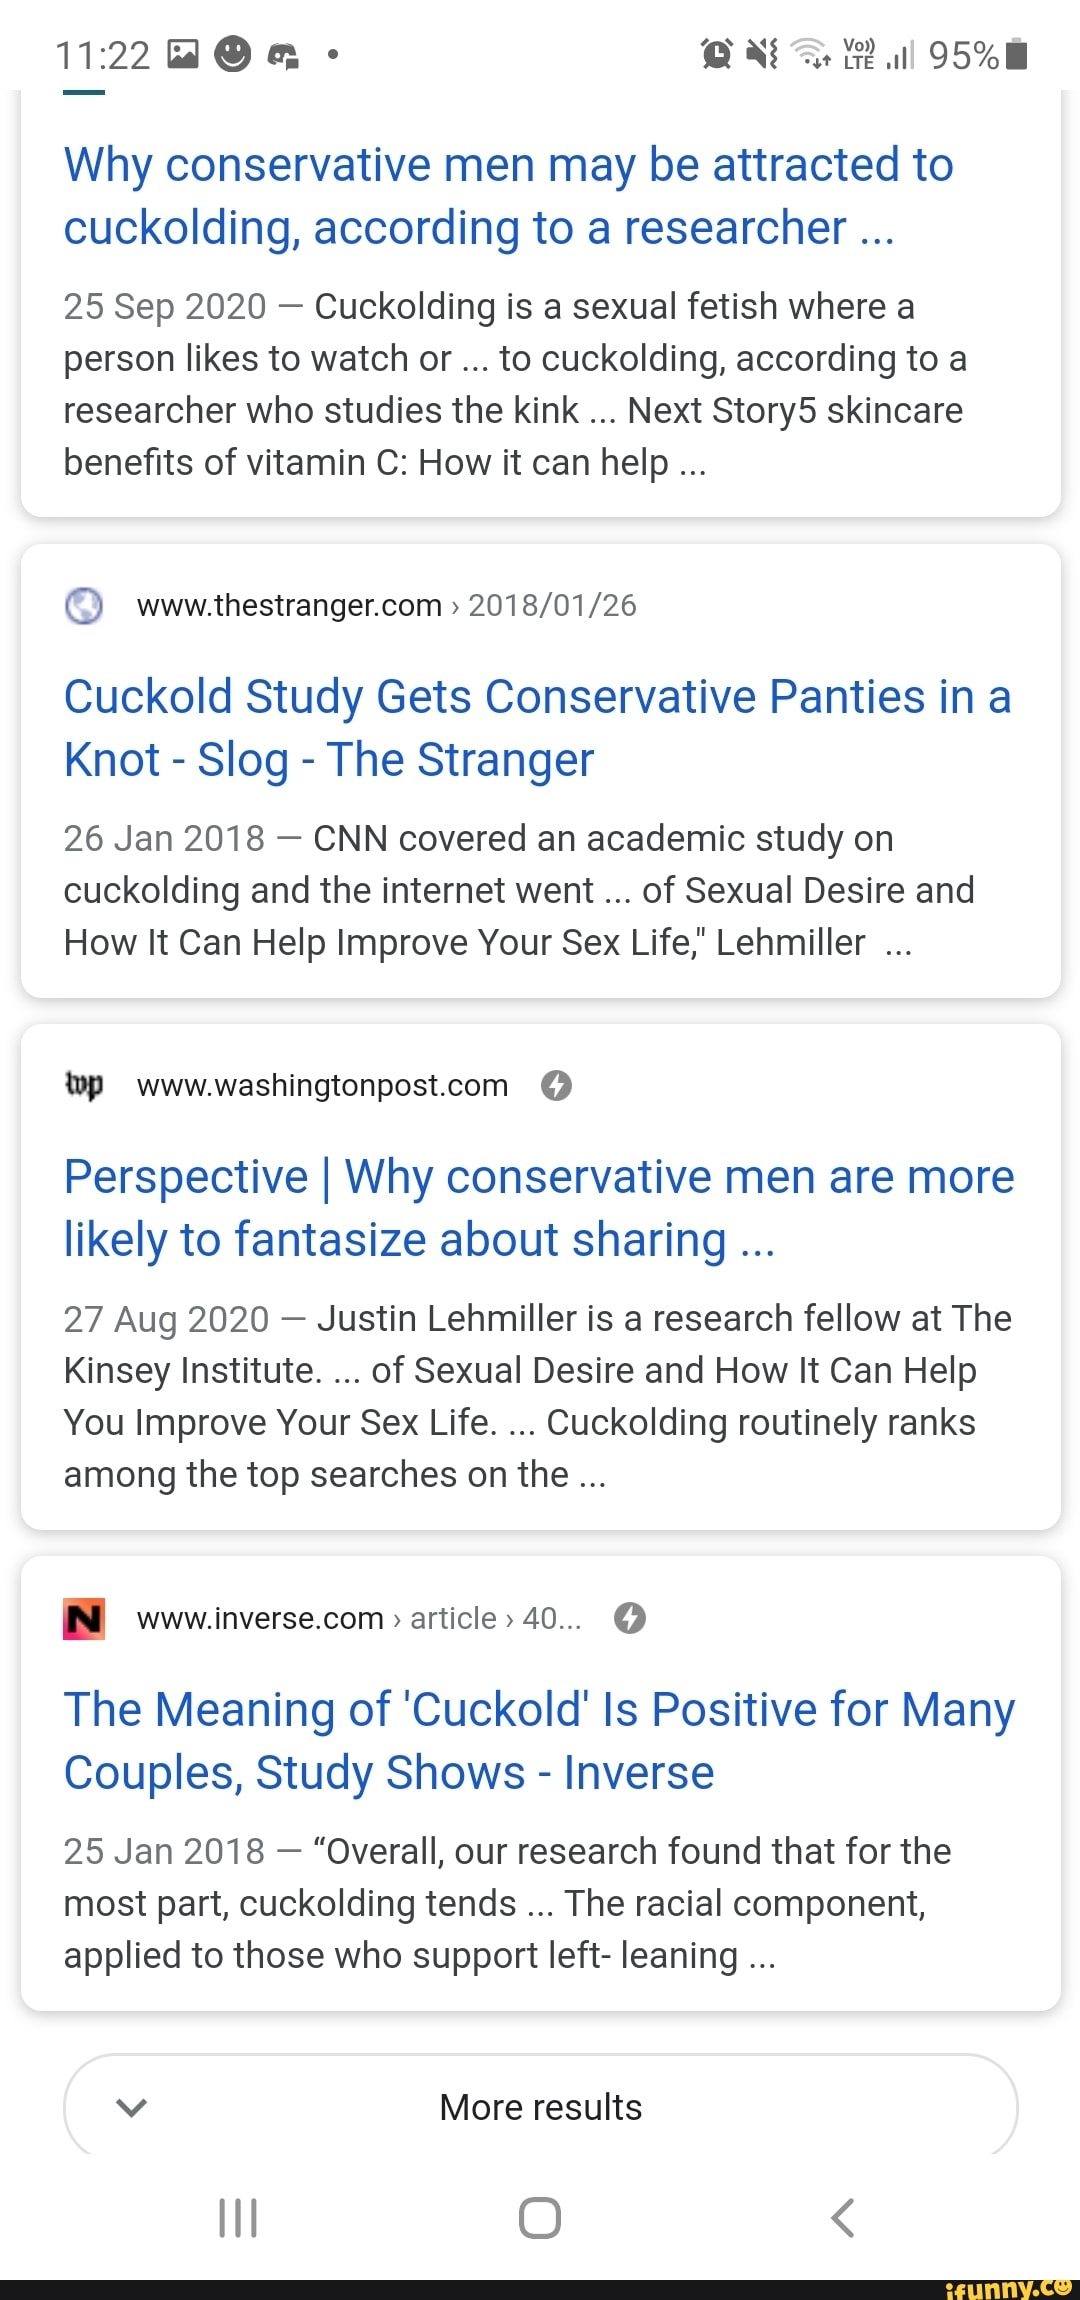 HO Why conservative men may be attracted to cuckolding, according to a researcher 25 Sep 2020 - photo photo